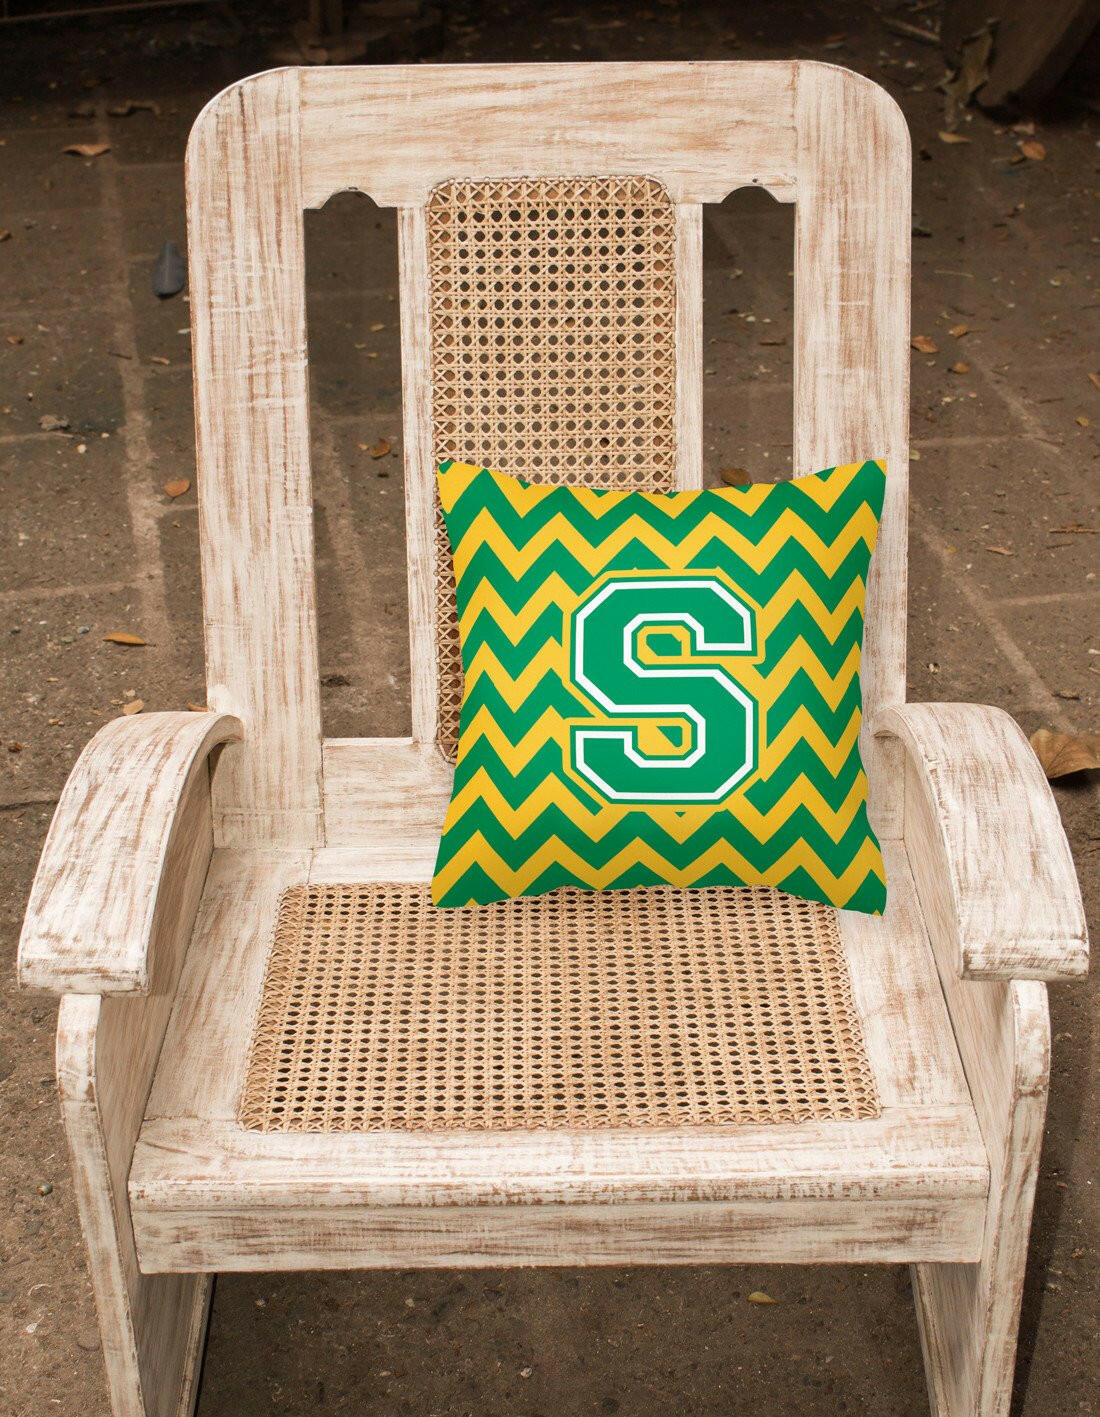 Letter S Chevron Green and Gold Fabric Decorative Pillow CJ1059-SPW1414 by Caroline's Treasures